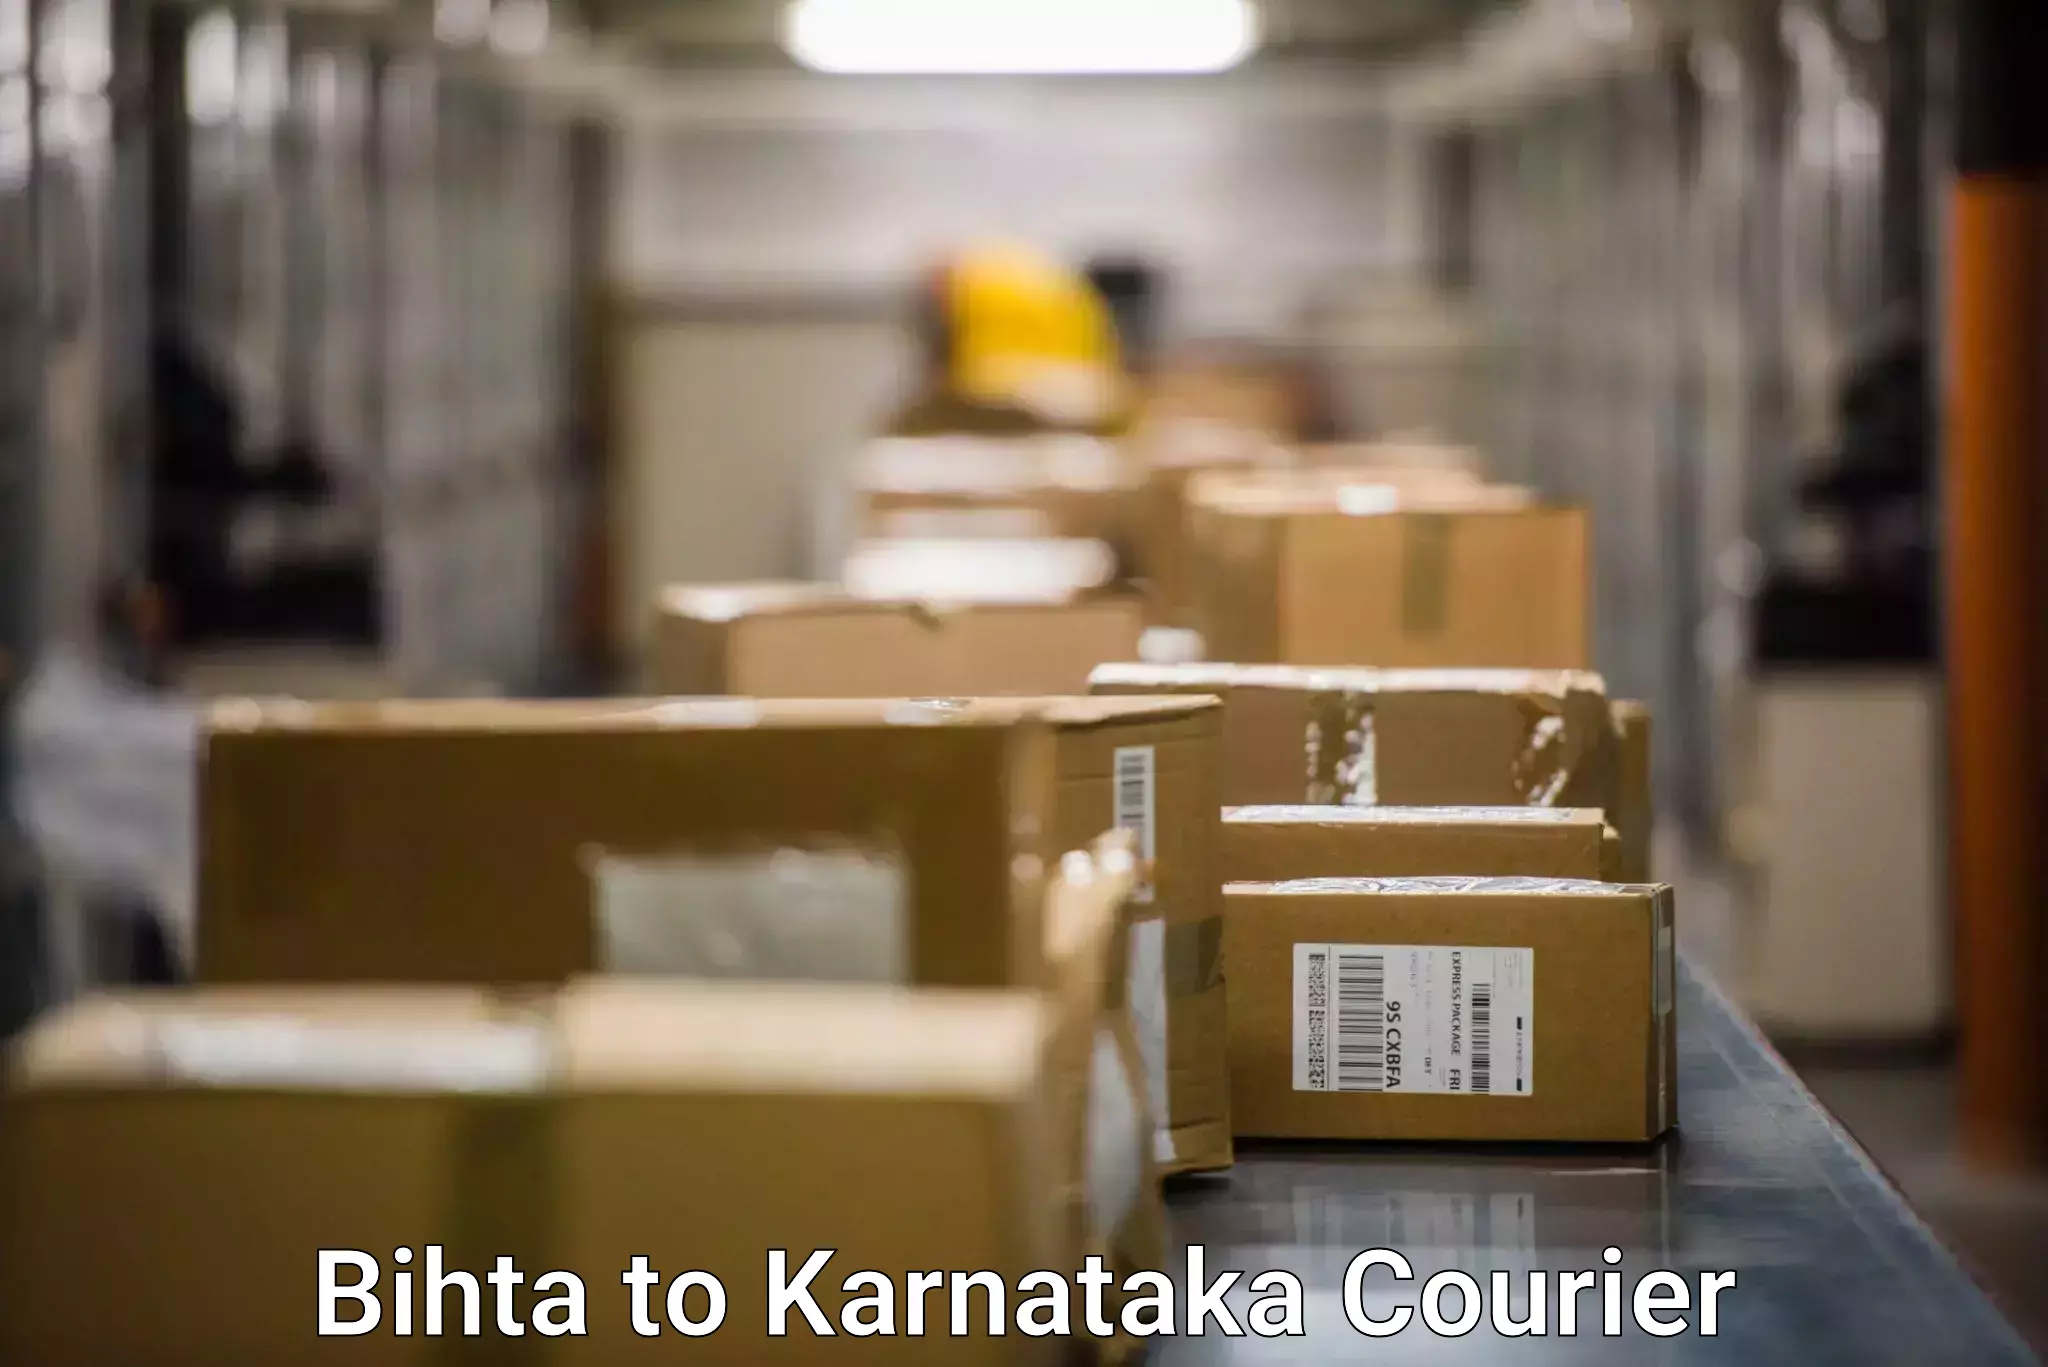 Secure freight services in Bihta to Hoovina Hadagali